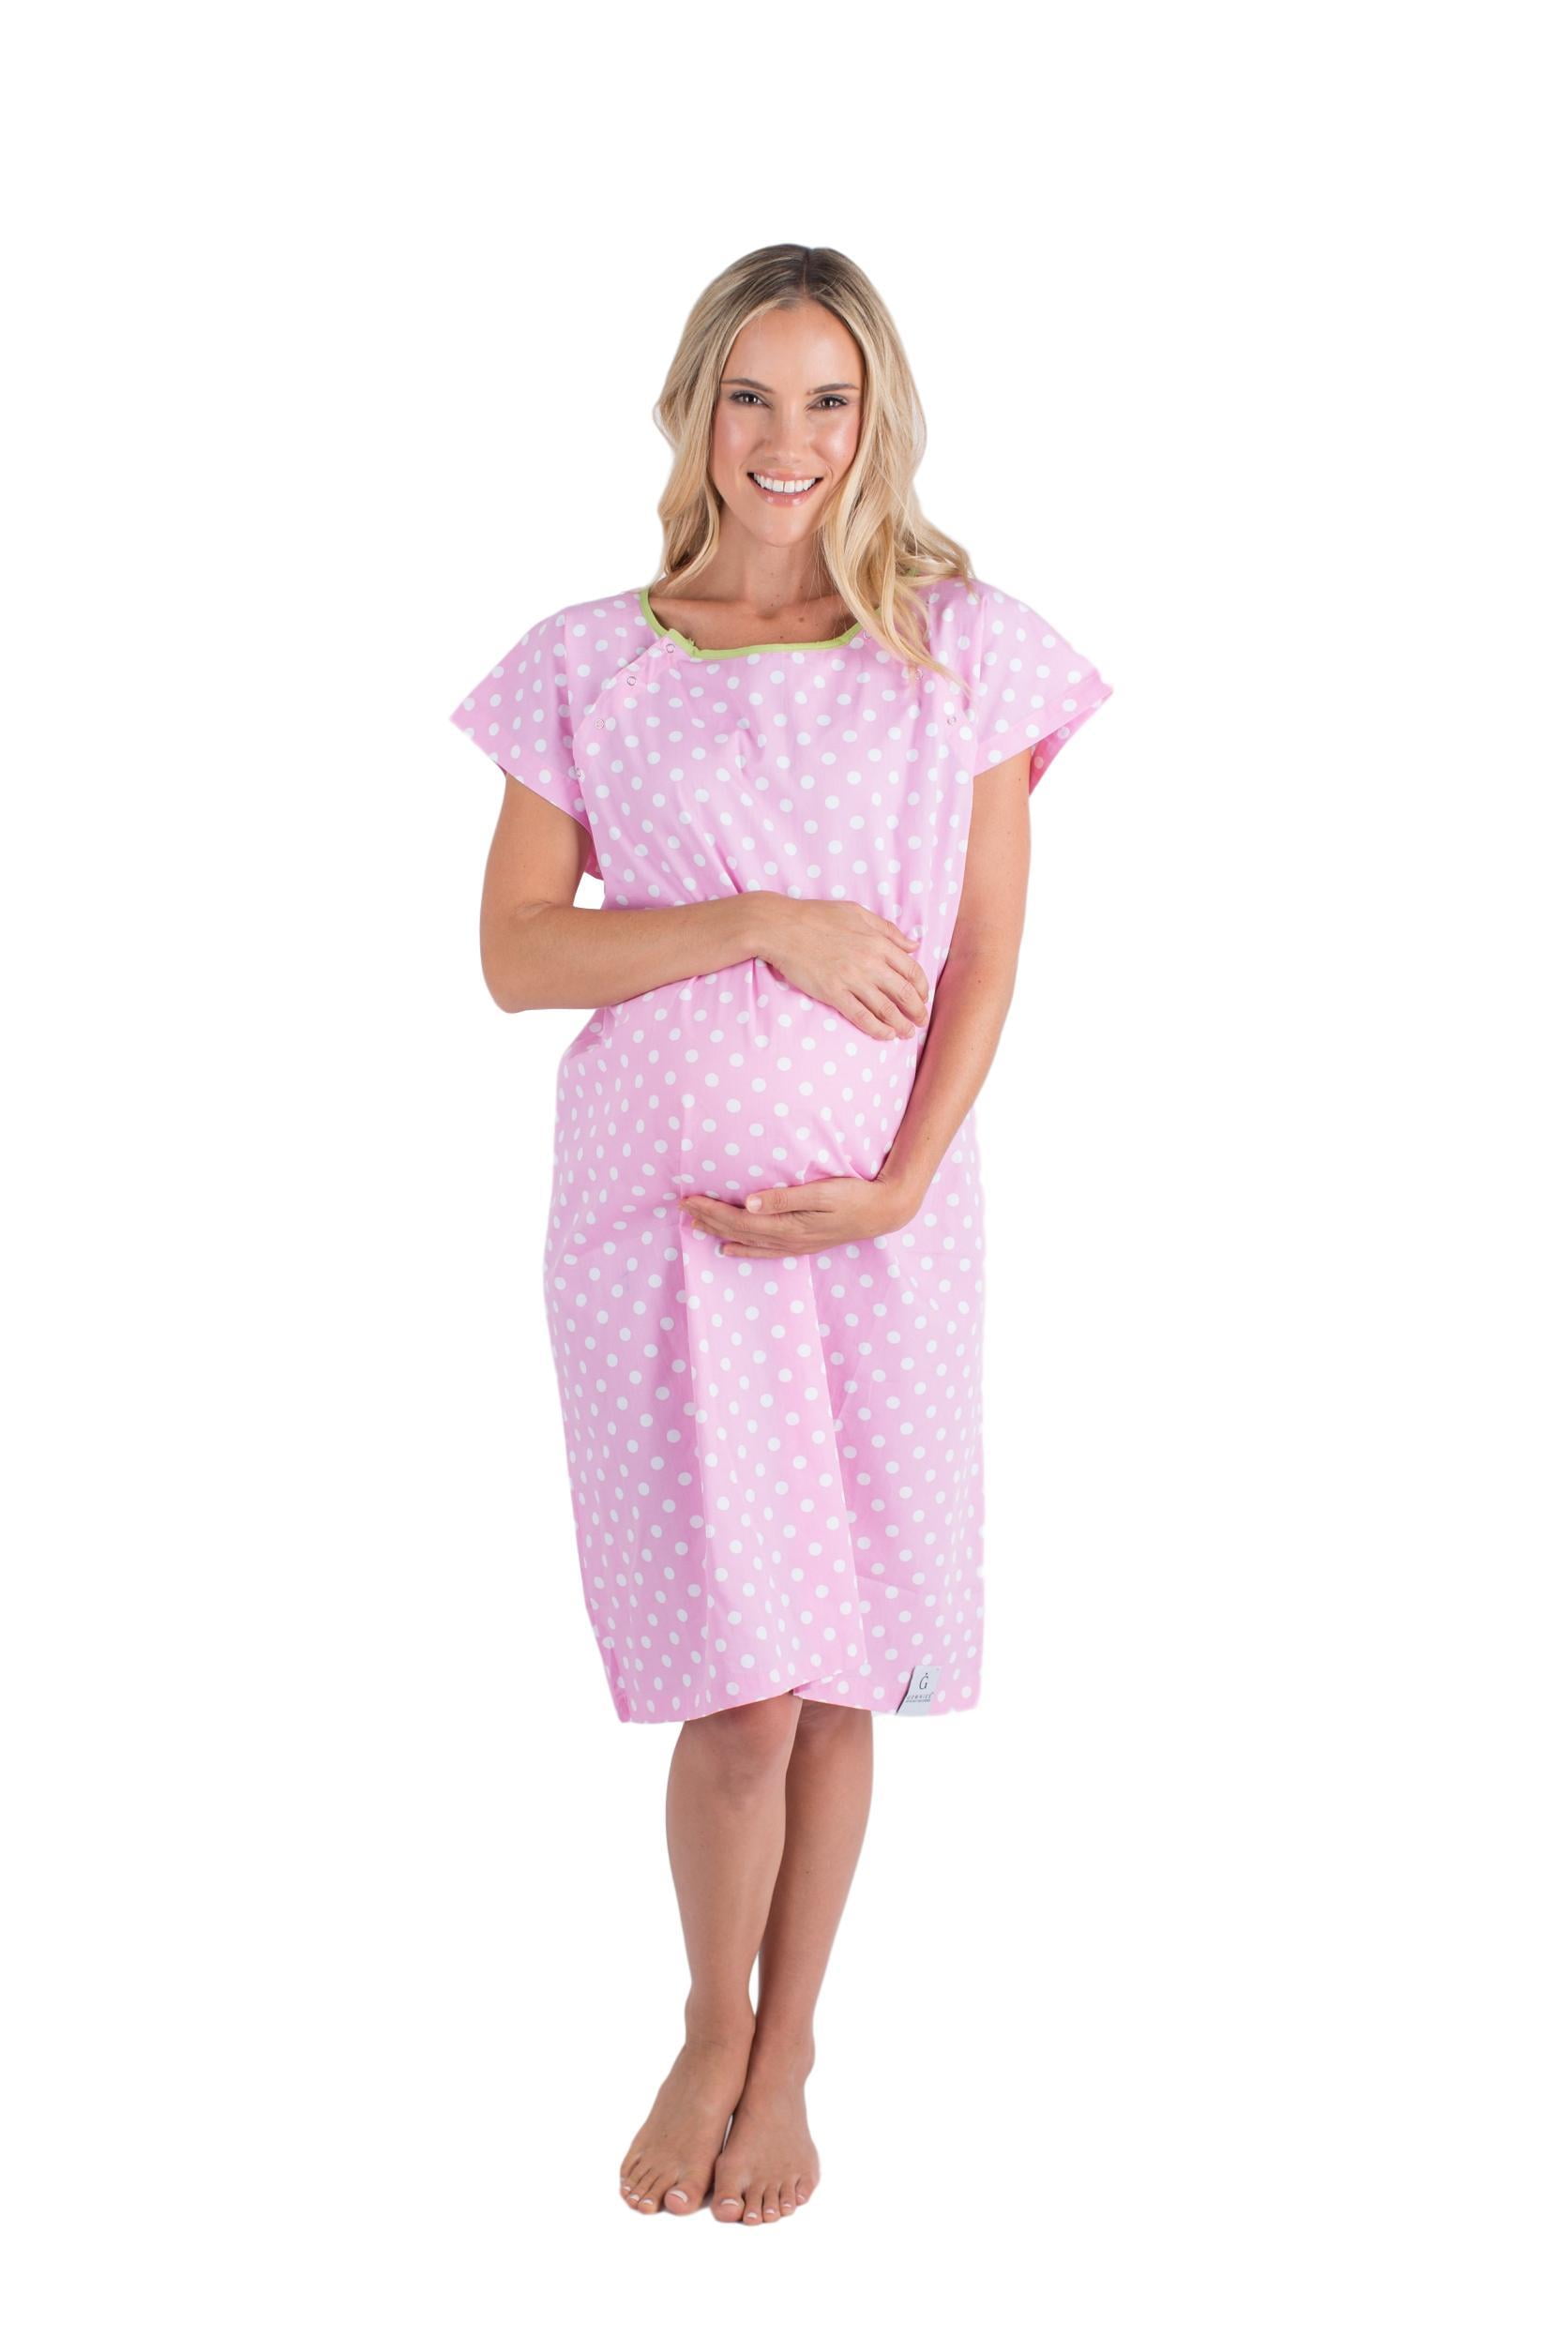 Deluxe Patient Hospital Gown, Easy Care, Soft & Comfortable GOWNS -  12Pk  - Walmart.com